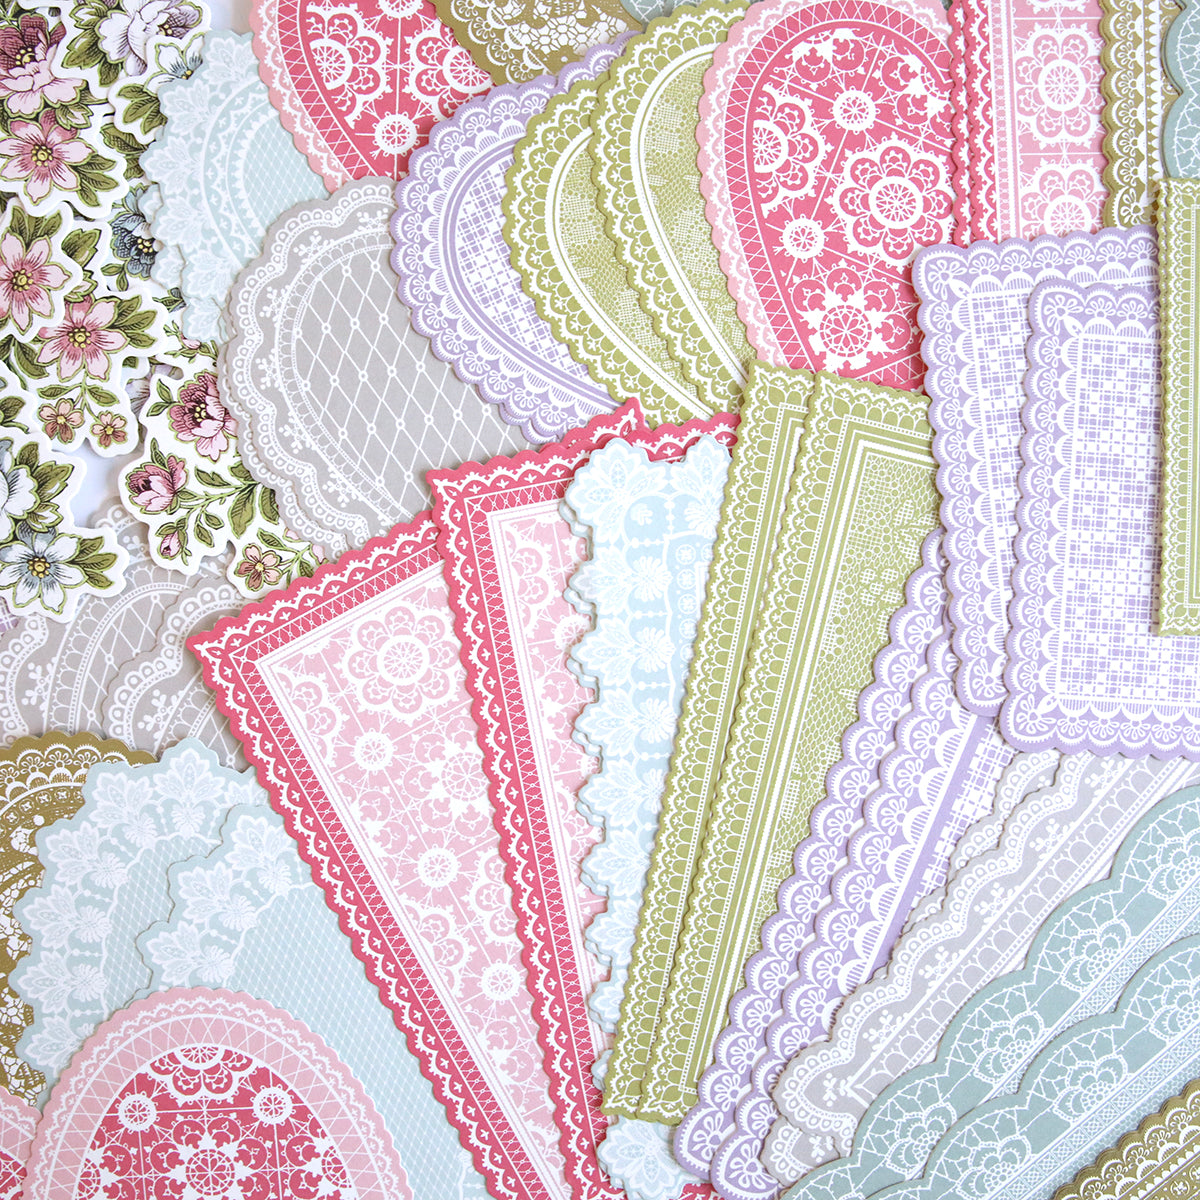 A pile of papers adorned with Lace Doily Embellishments.